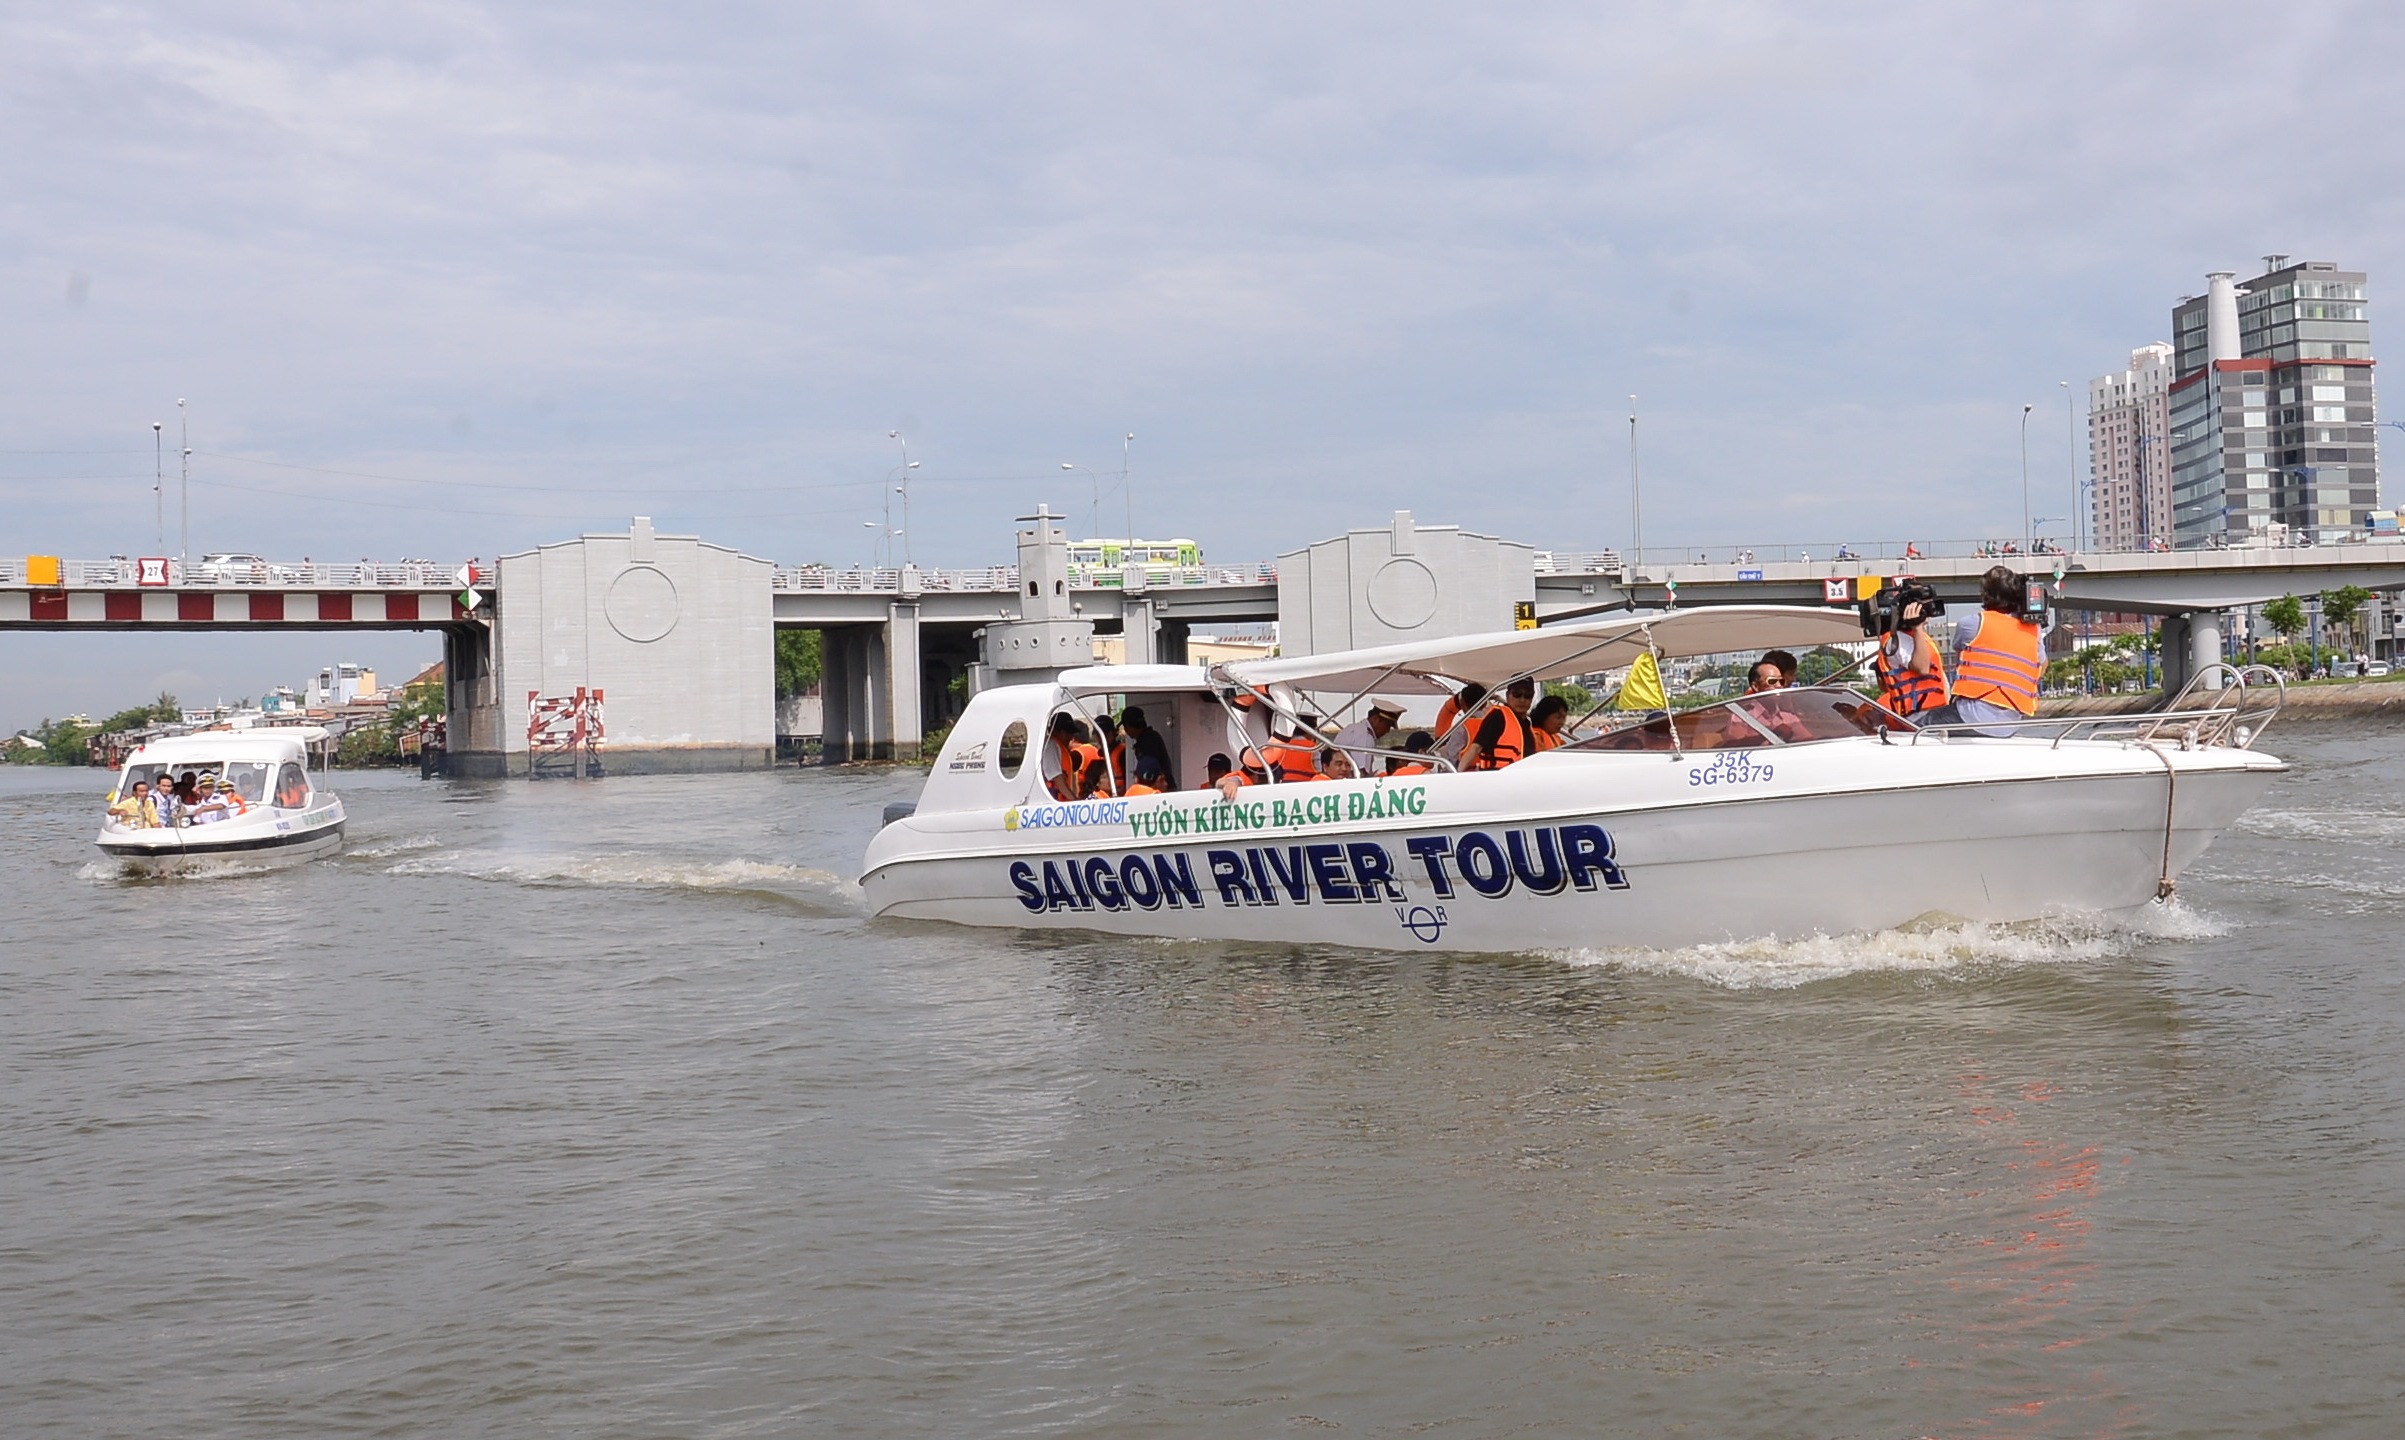 Ho Chi Minh City officially launches river tours